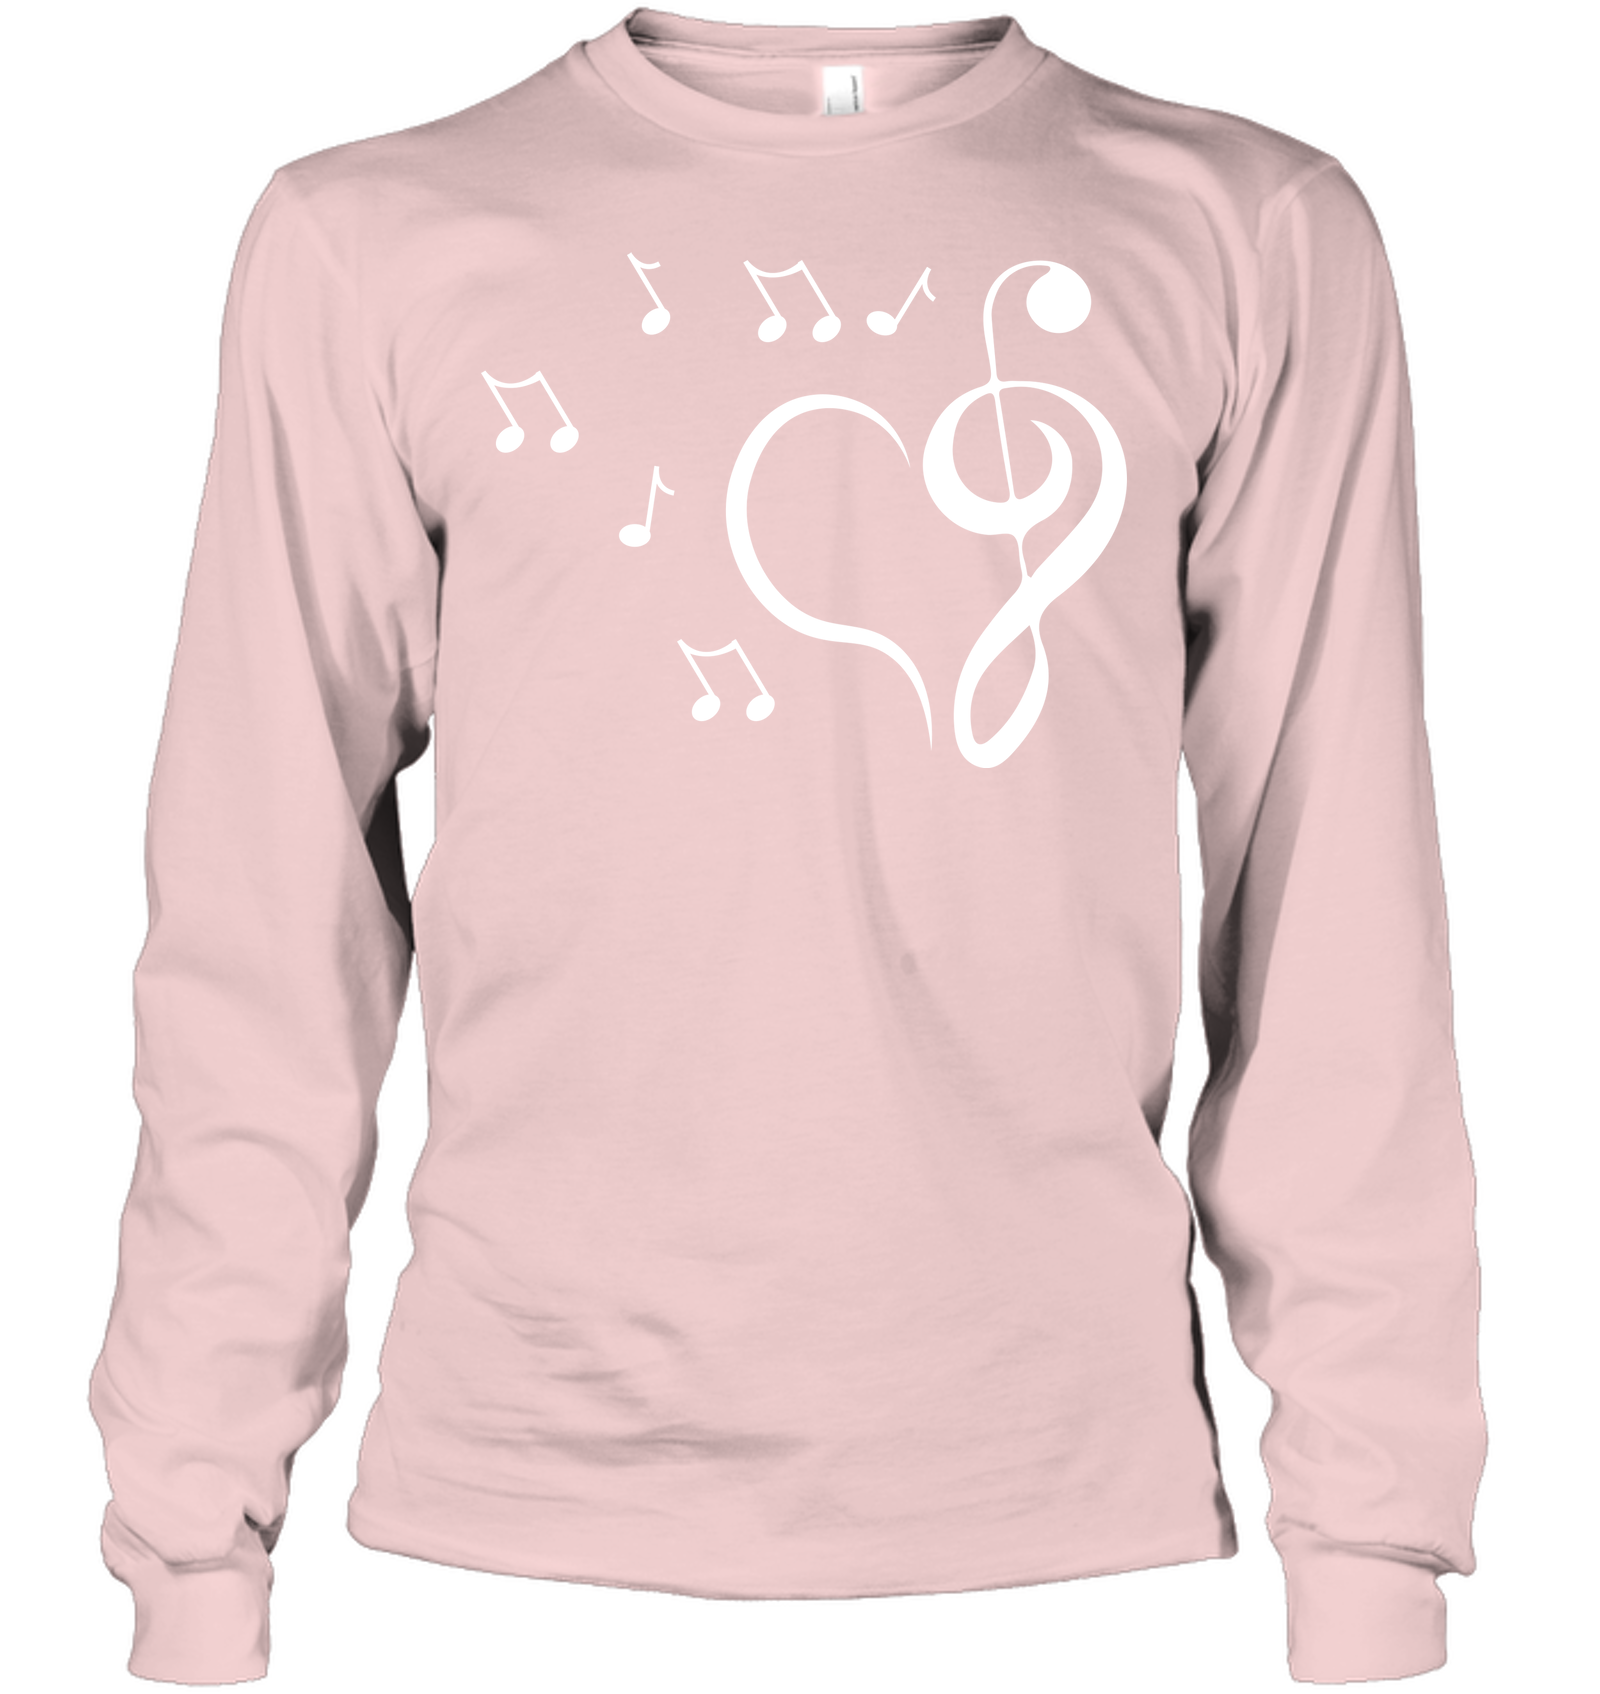 Musical heart with floating notes - Gildan Adult Classic Long Sleeve T-Shirt